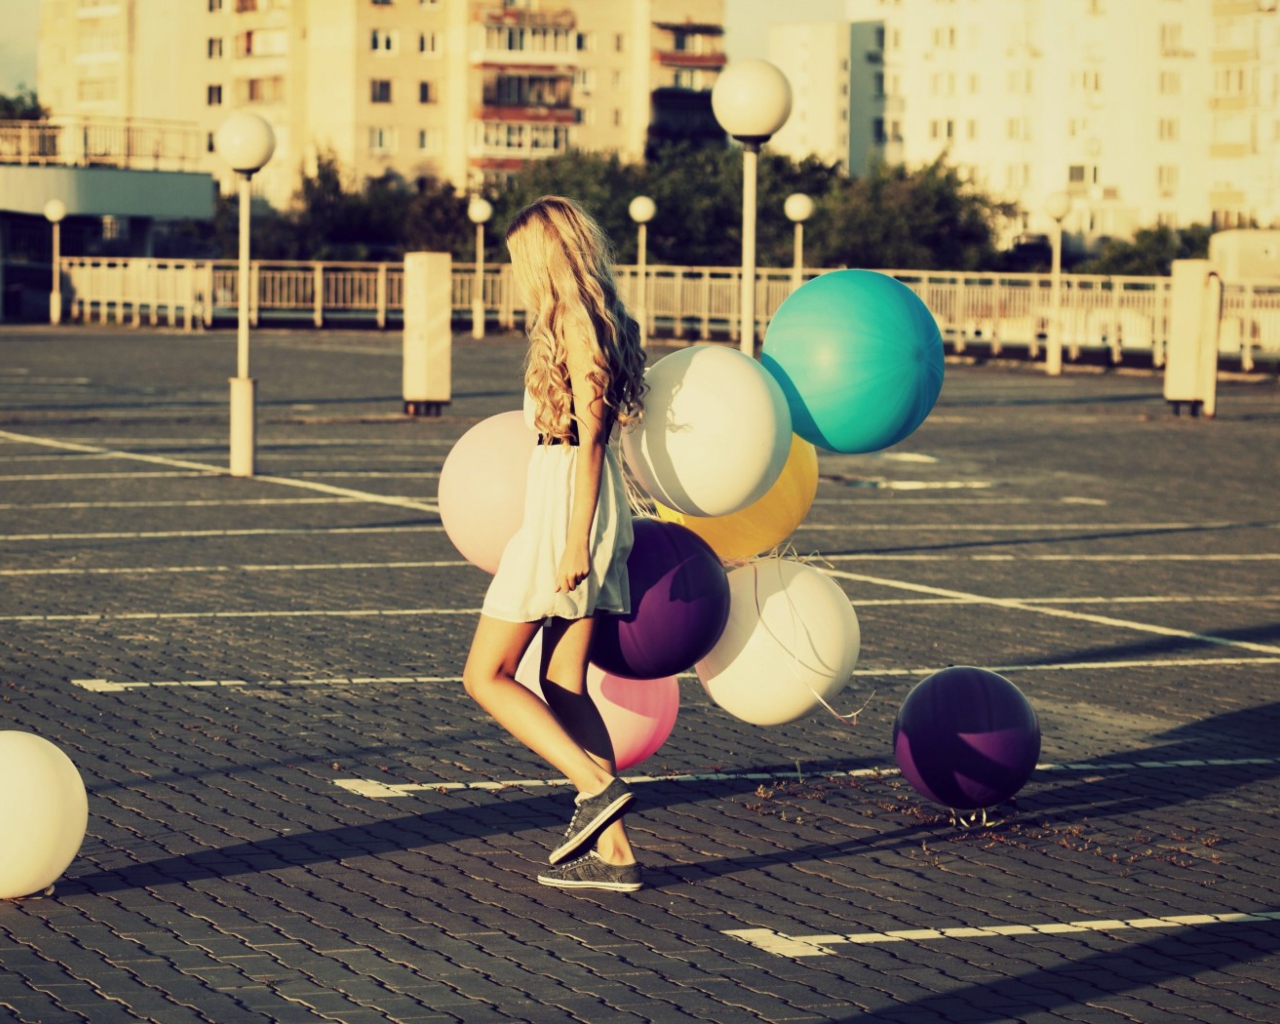 Happy Girl With Colorful Balloons screenshot #1 1280x1024